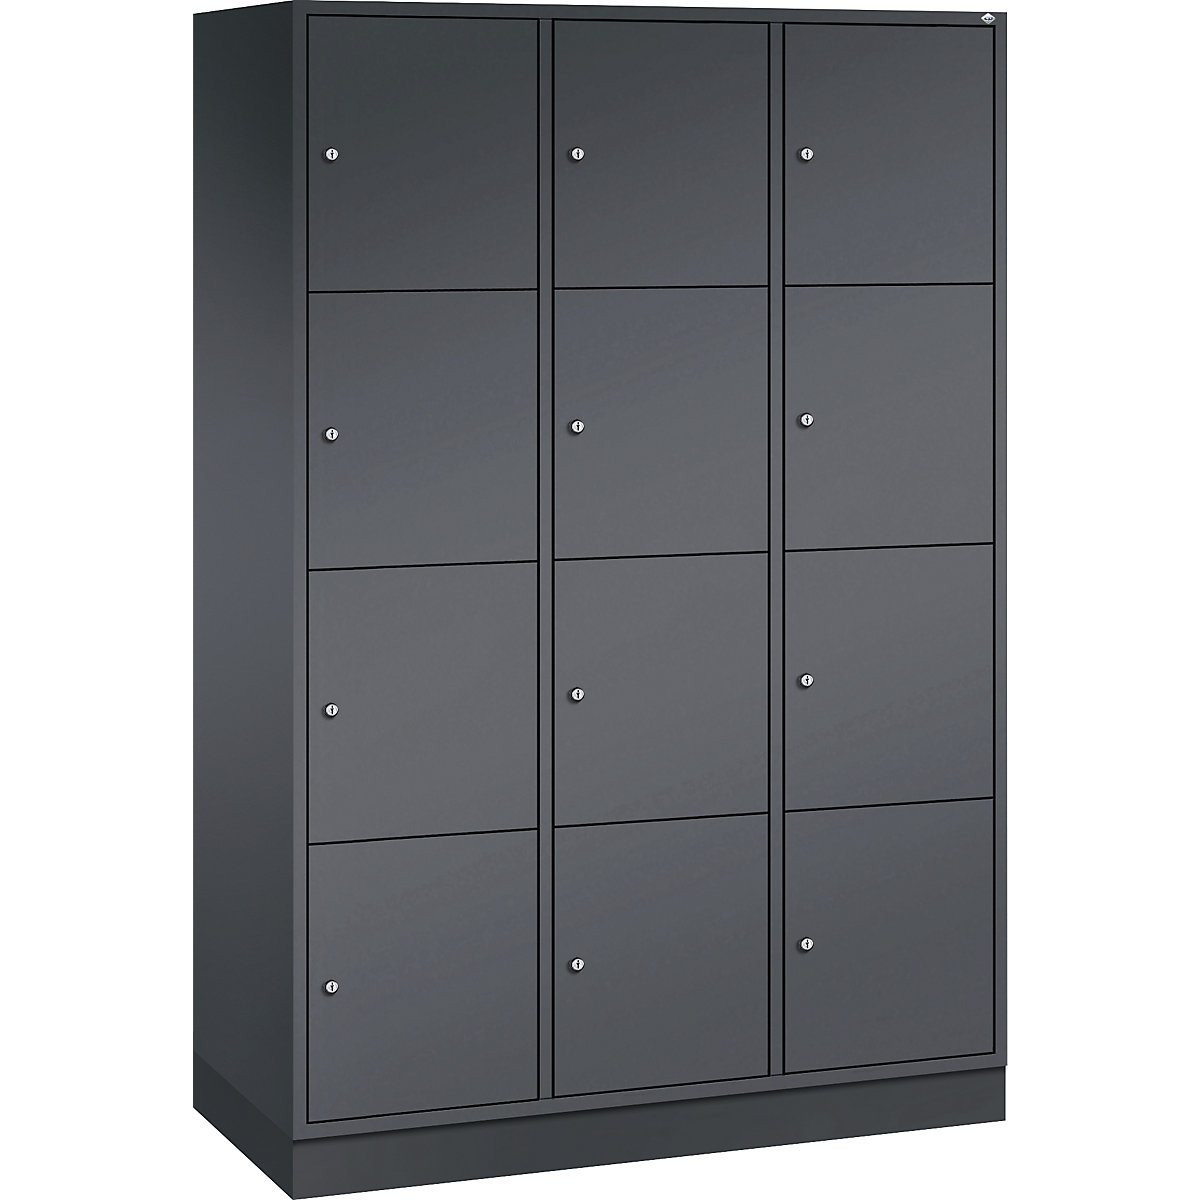 INTRO steel compartment locker, compartment height 435 mm – C+P, WxD 1220 x 500 mm, 12 compartments, black grey body, black grey doors